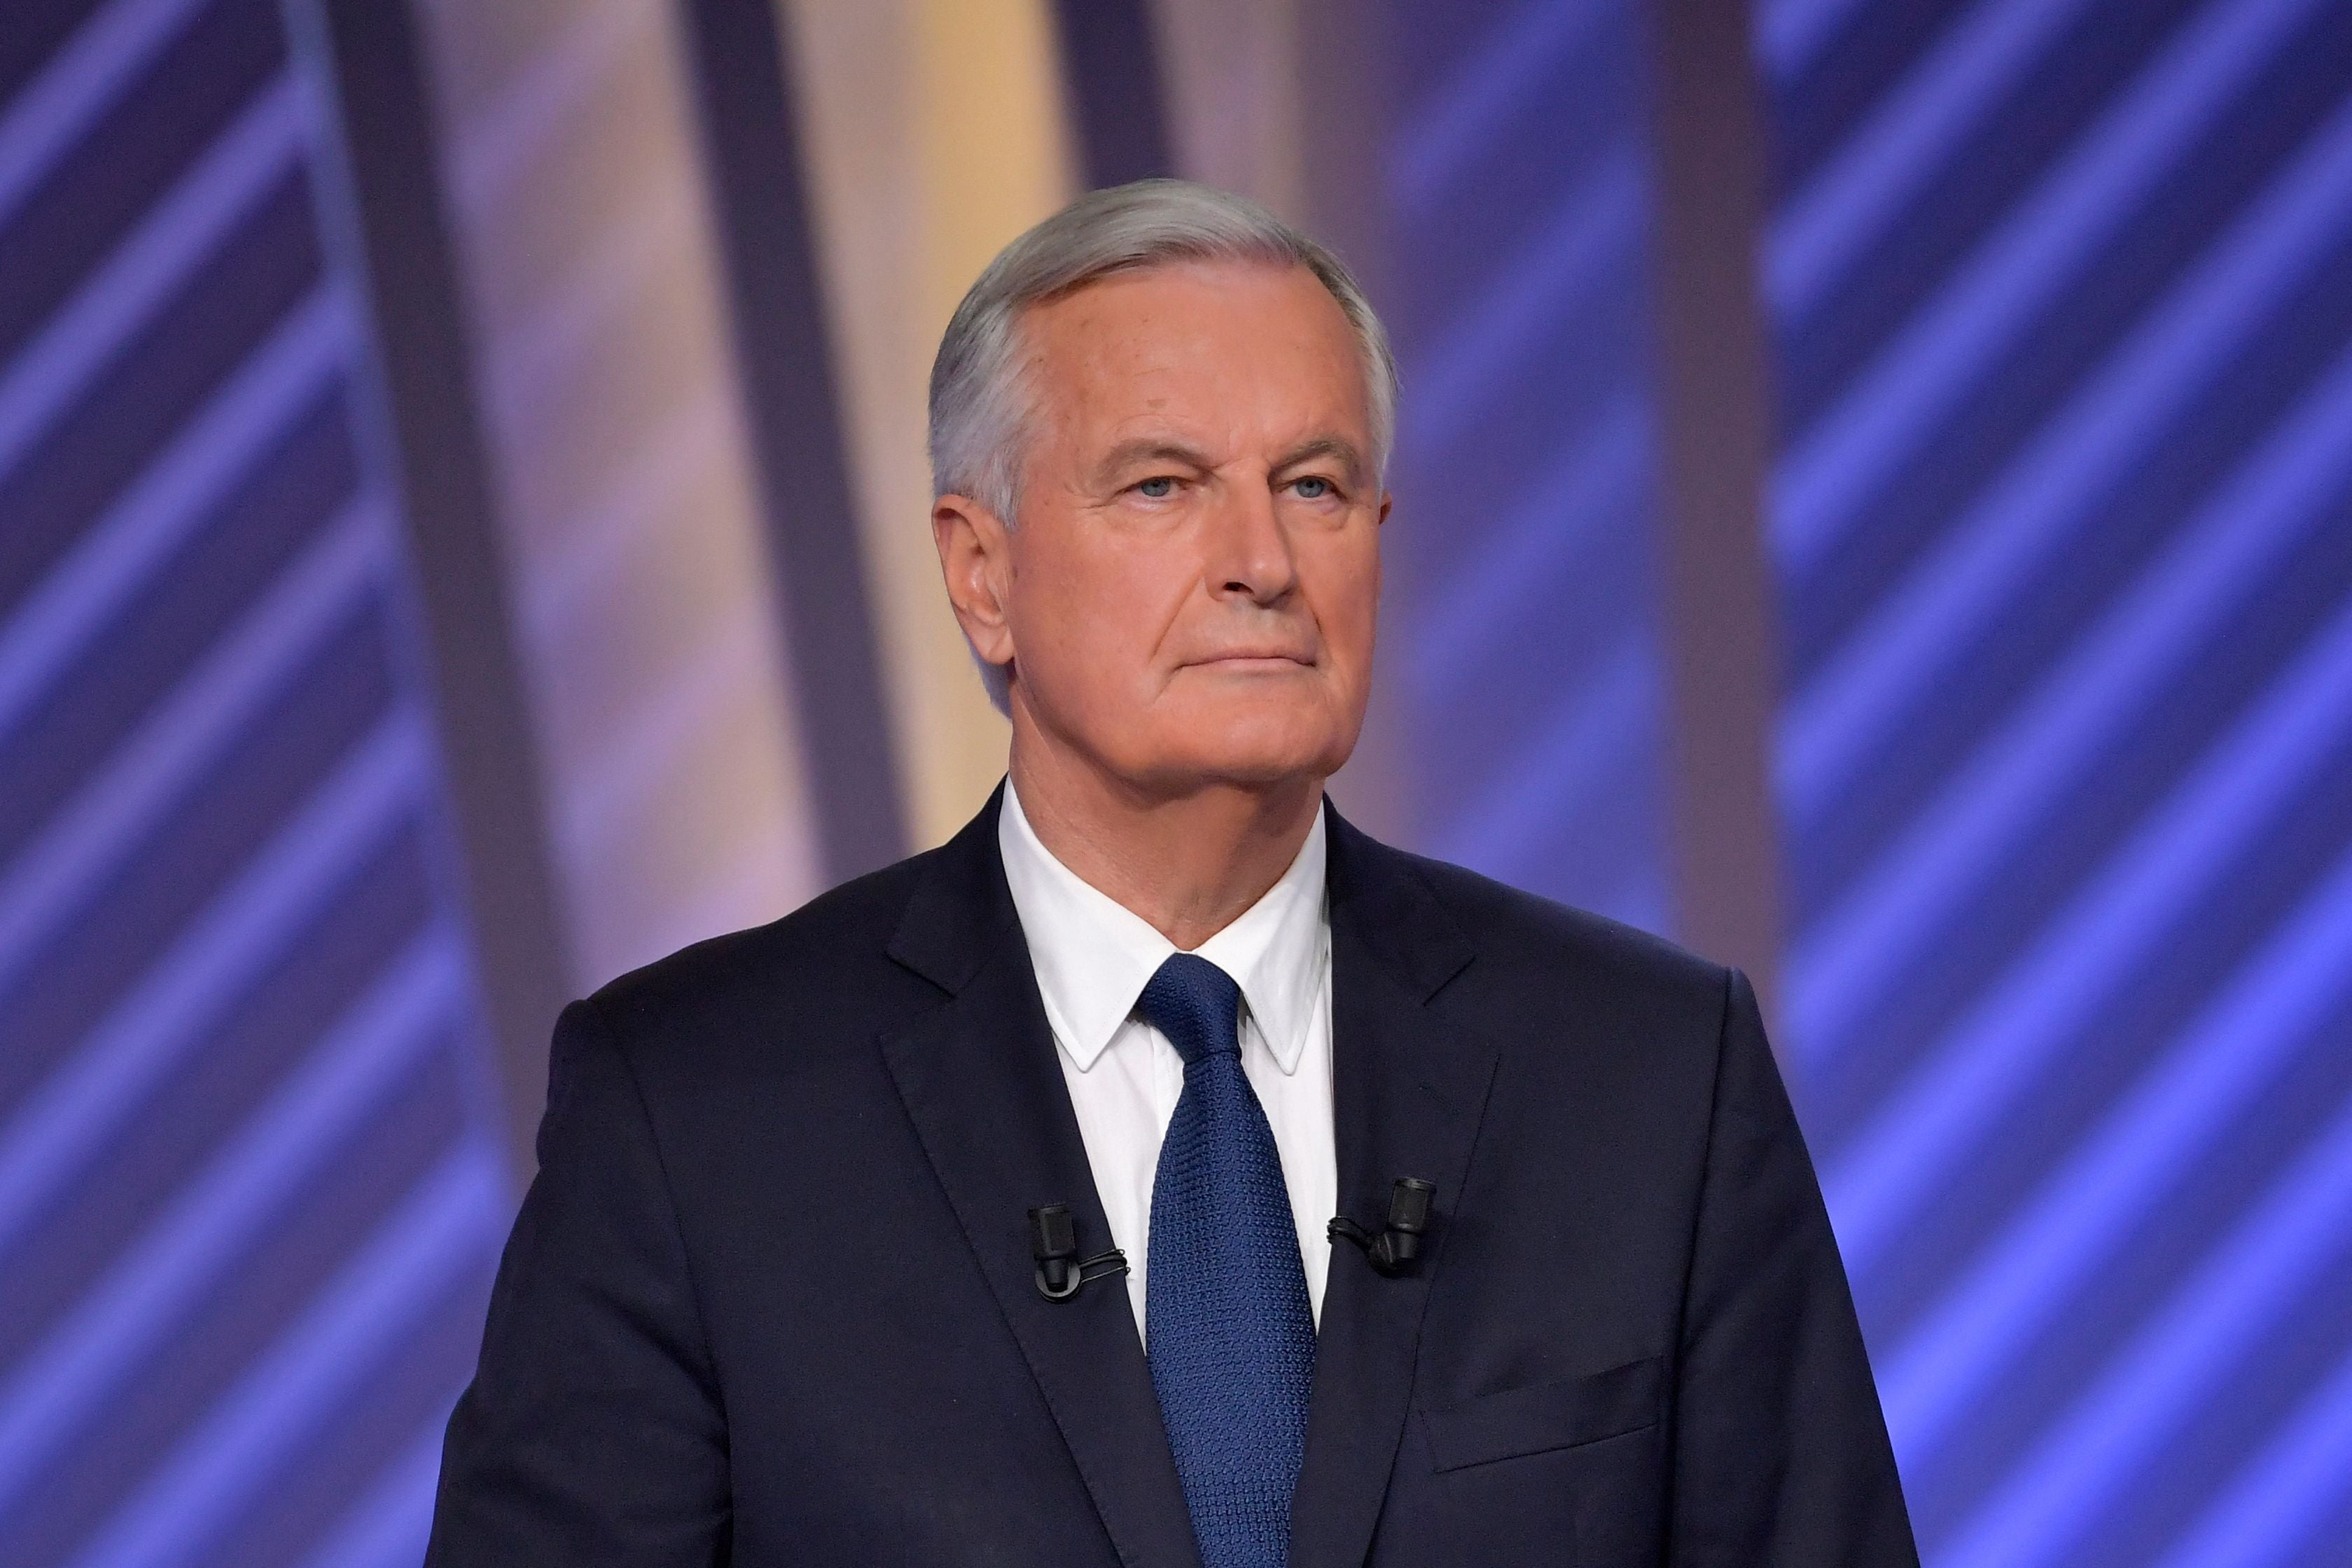 Michel Barnier poses prior the debate between the Les Republicains (LR) candidates for the French presidential election